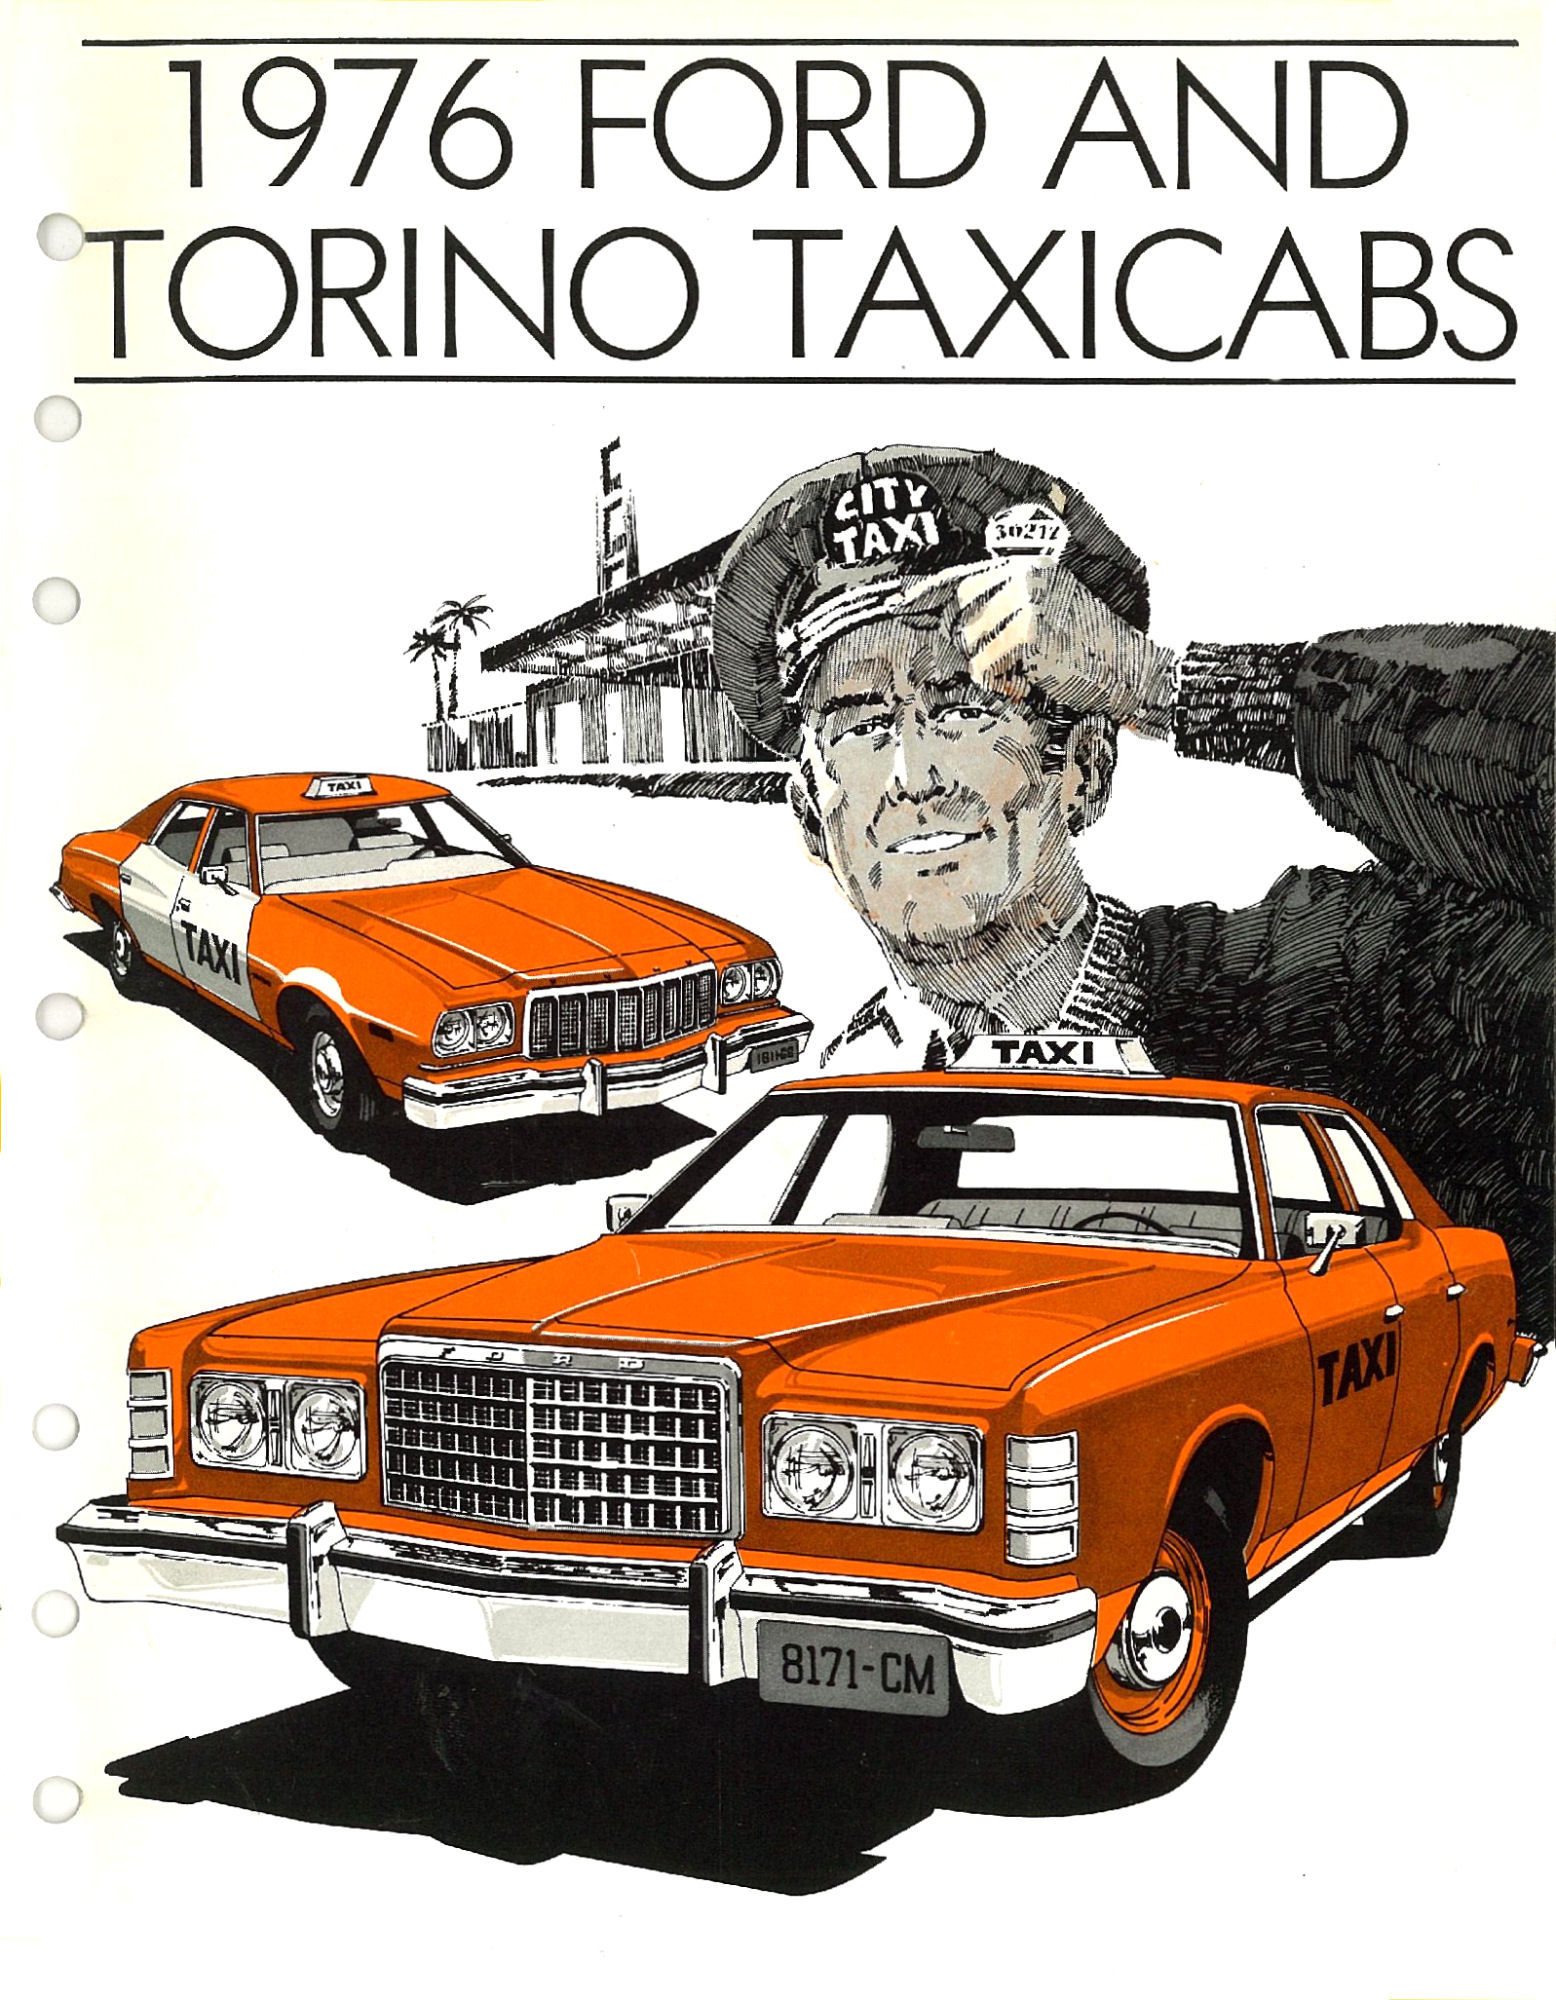 1976 Ford Taxicabs-01